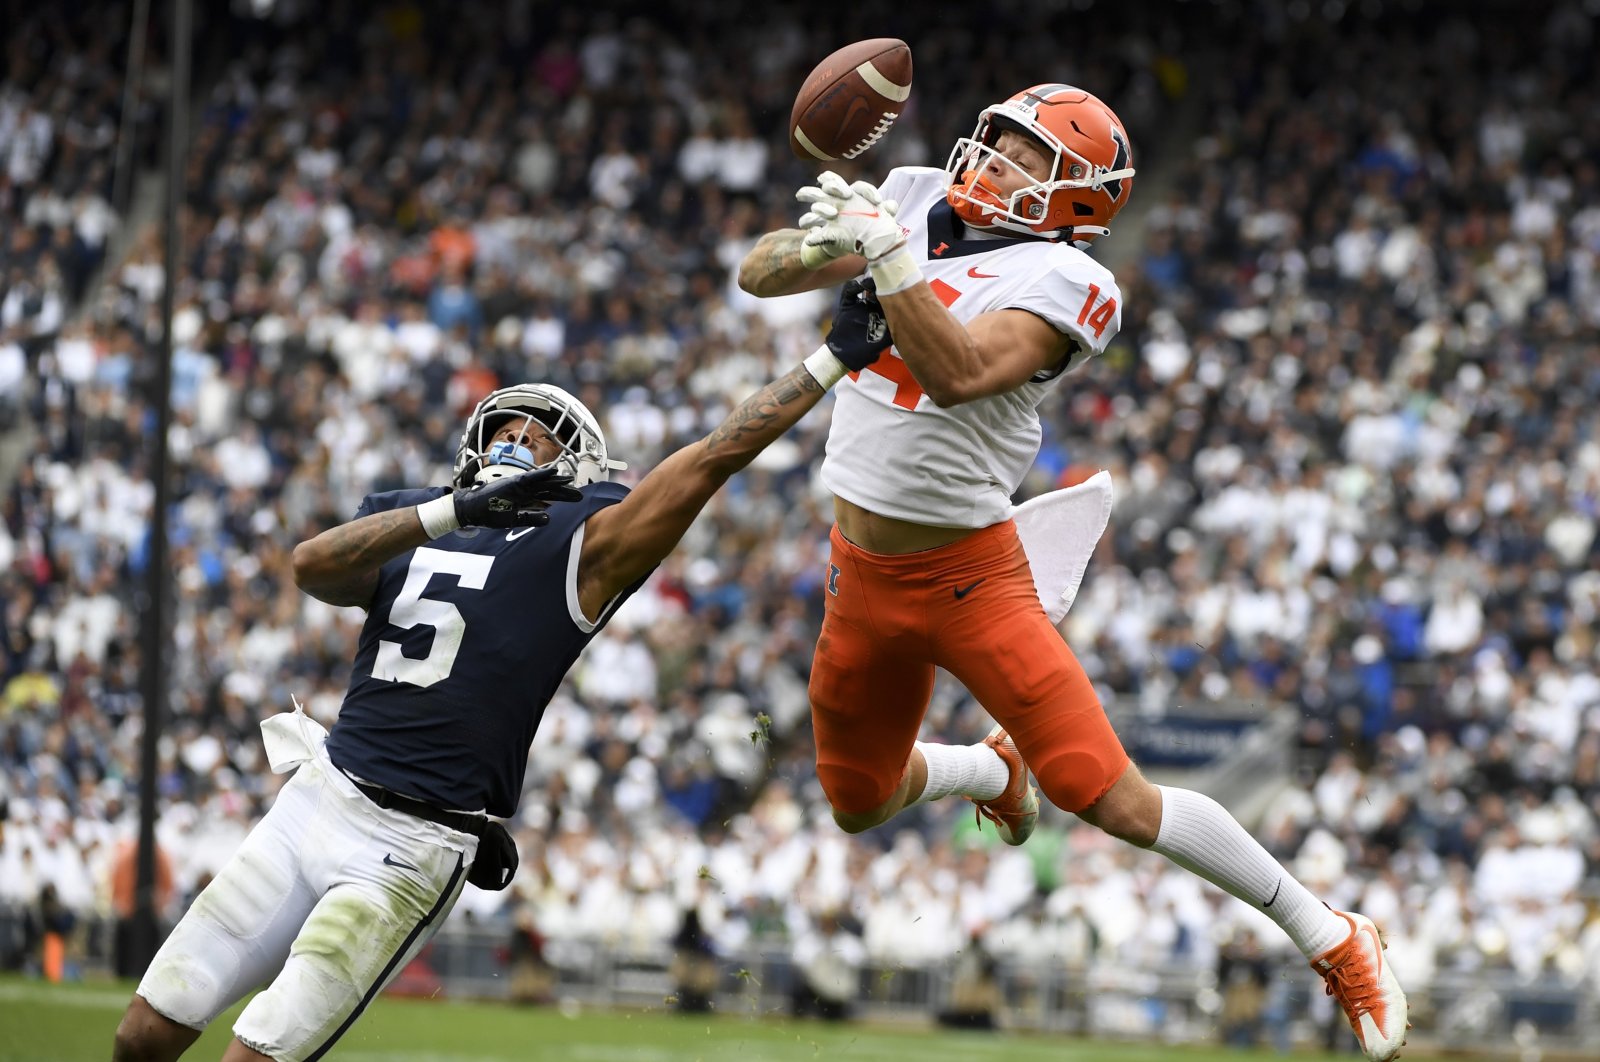 Penn State cornerback Tariq Castro-Fields (5) breaks up a pass intended for Illinois wide receiver Casey Washington (14) during the second half, State College, Pennsylvania, U.S., Oct. 23, 2021. (AP Photo)